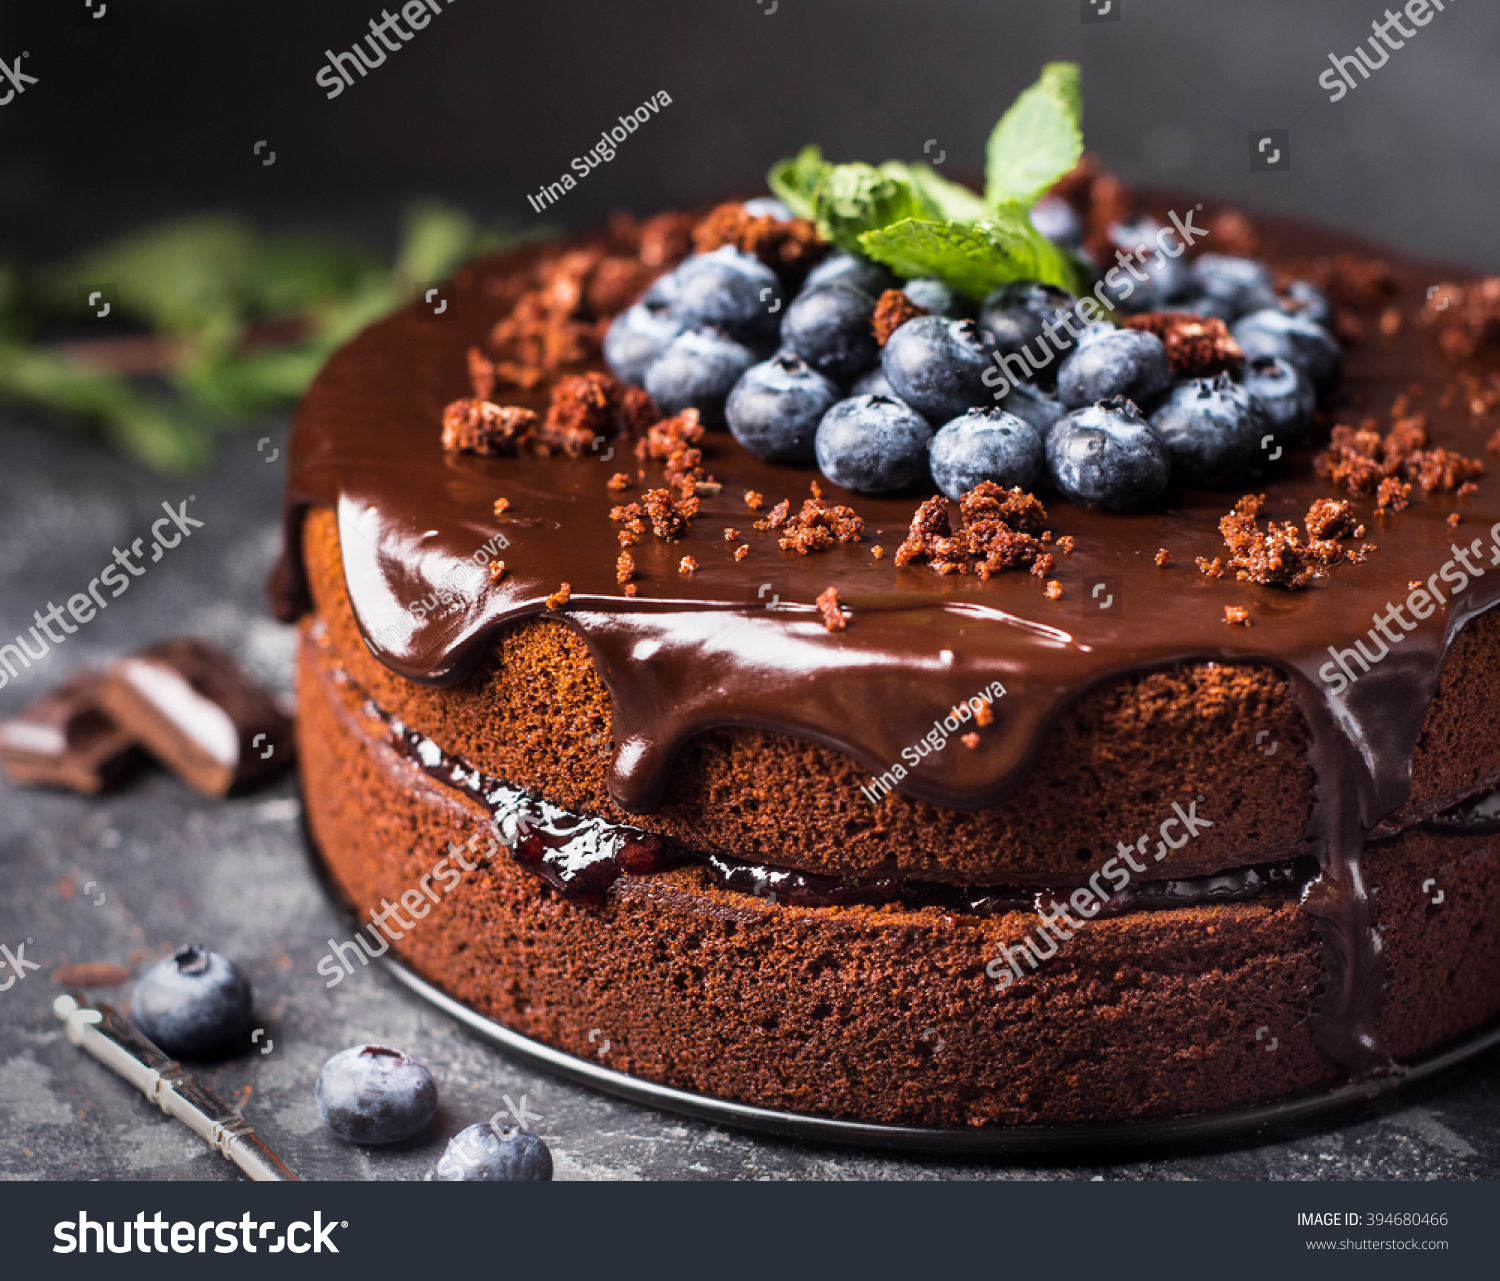 Chocolate cake with berries #394680466